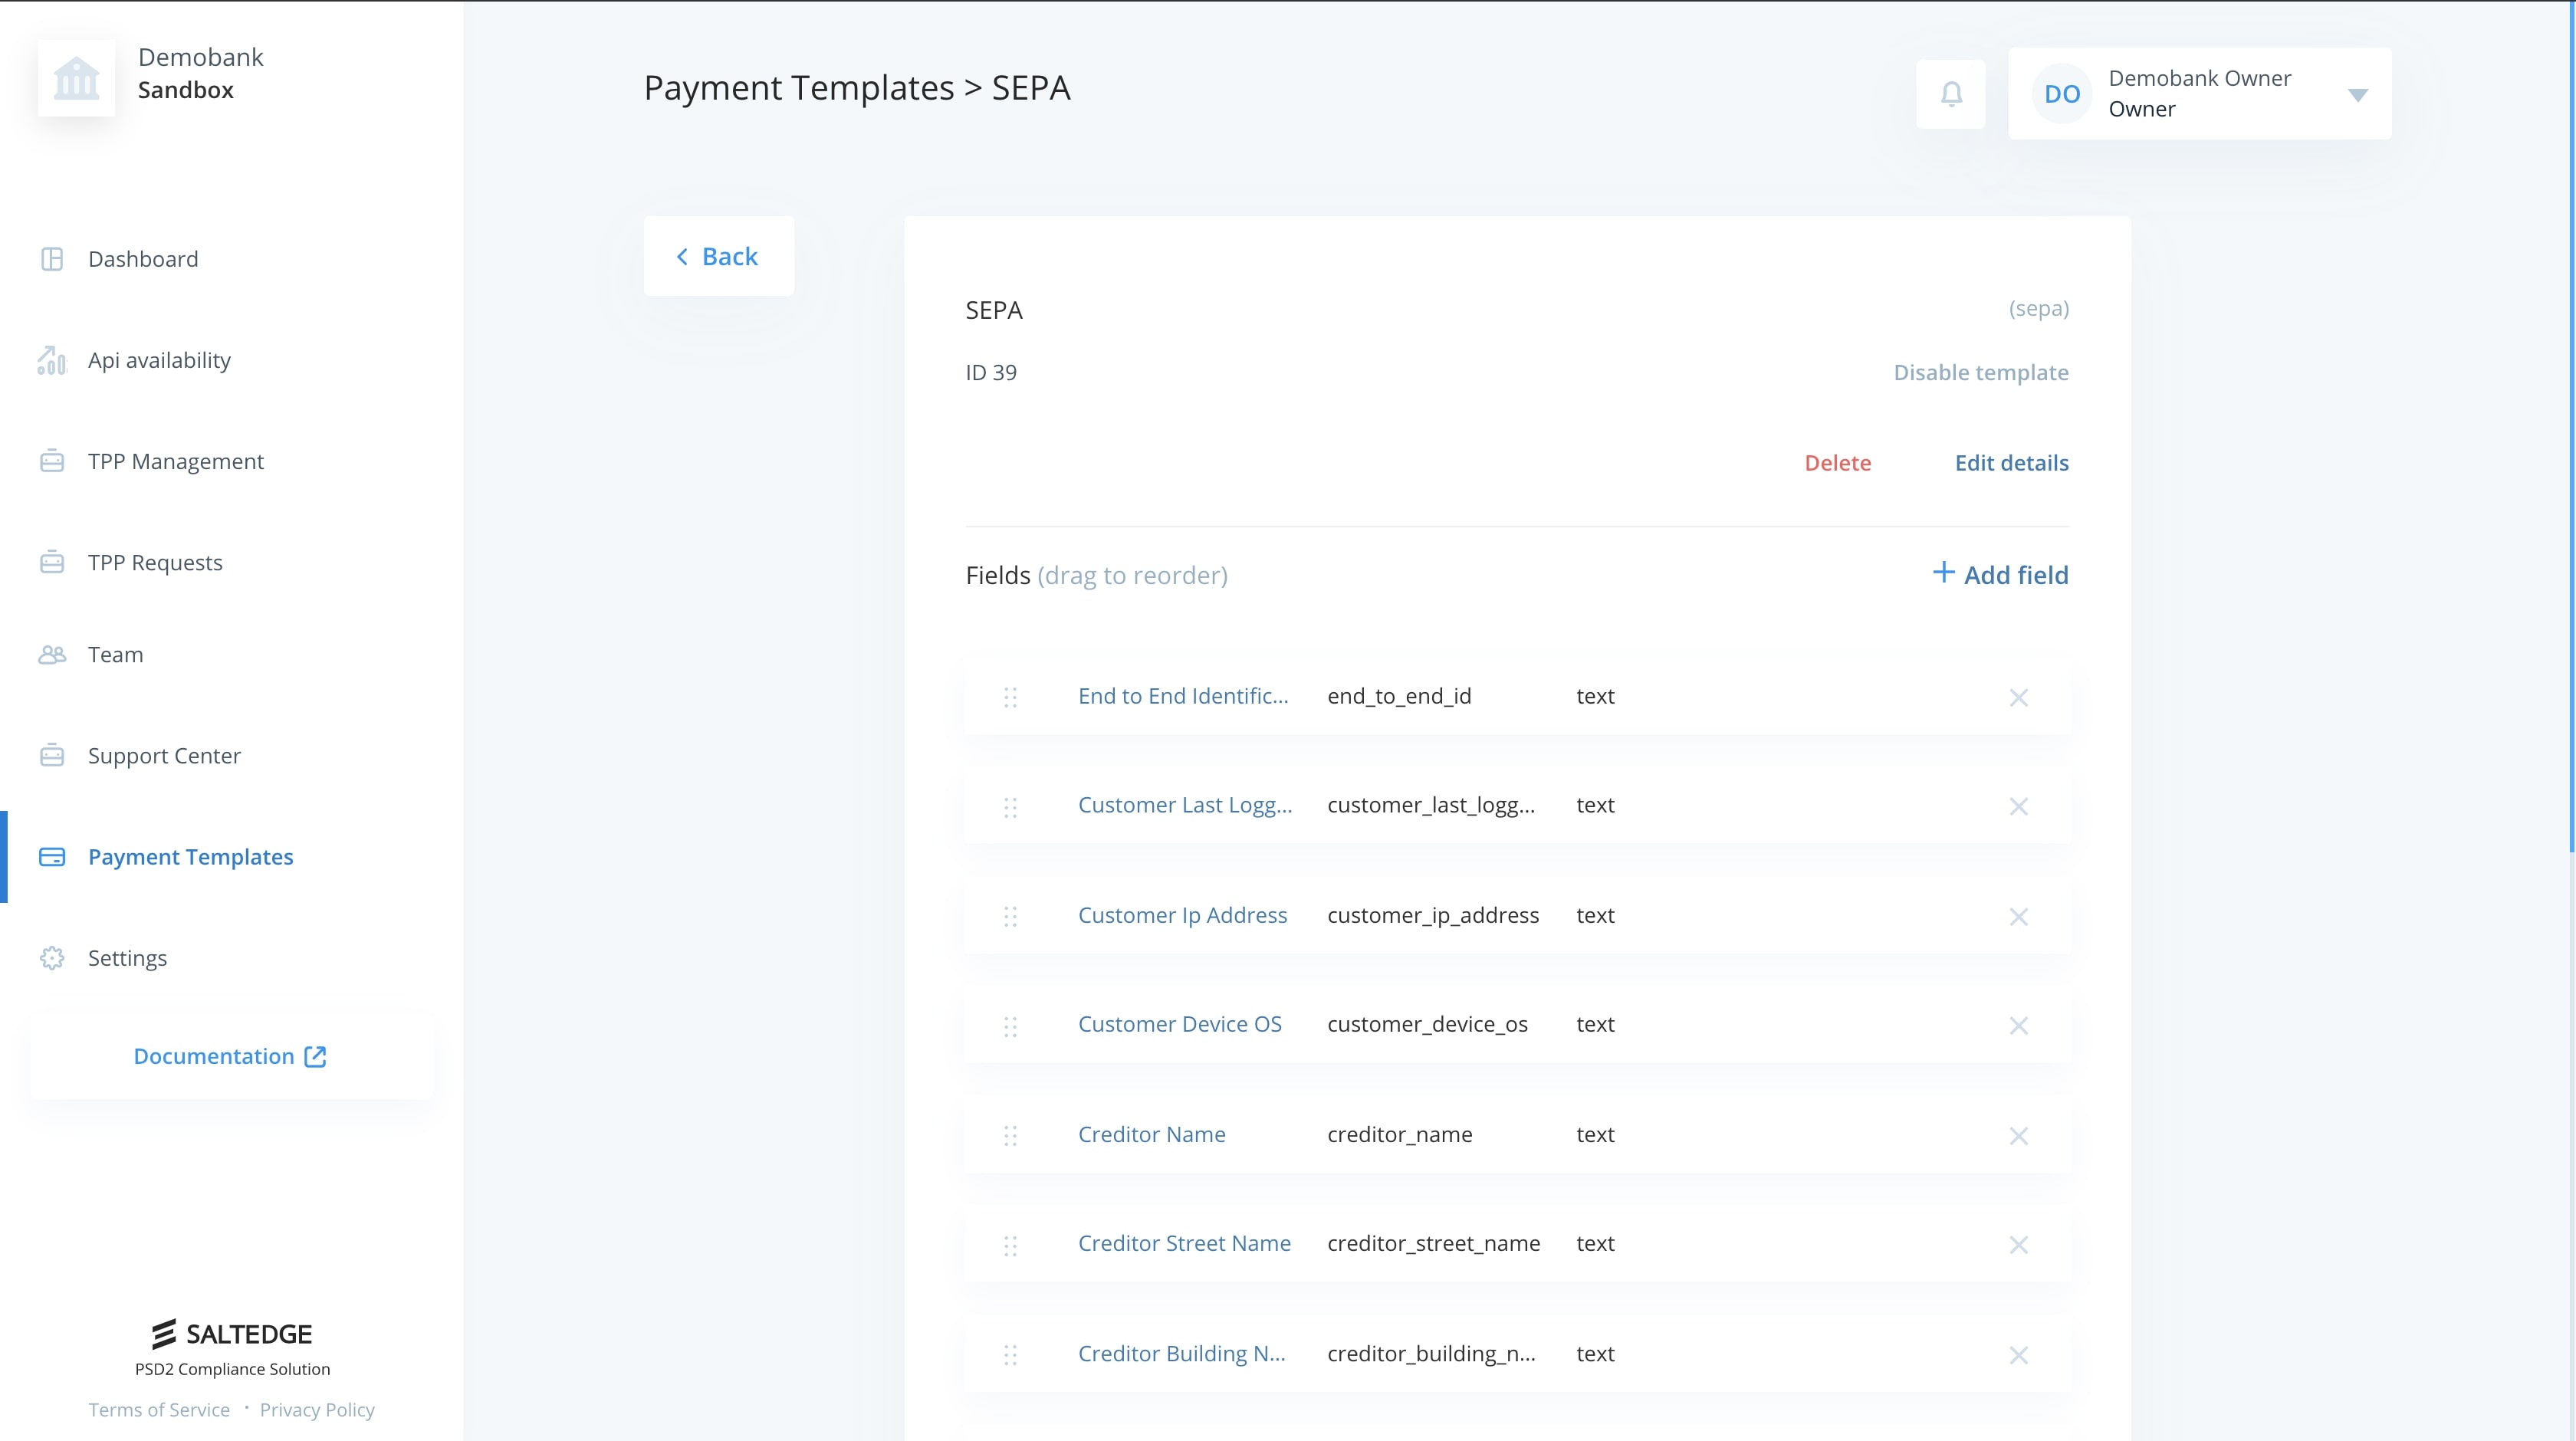 Payment Attributes